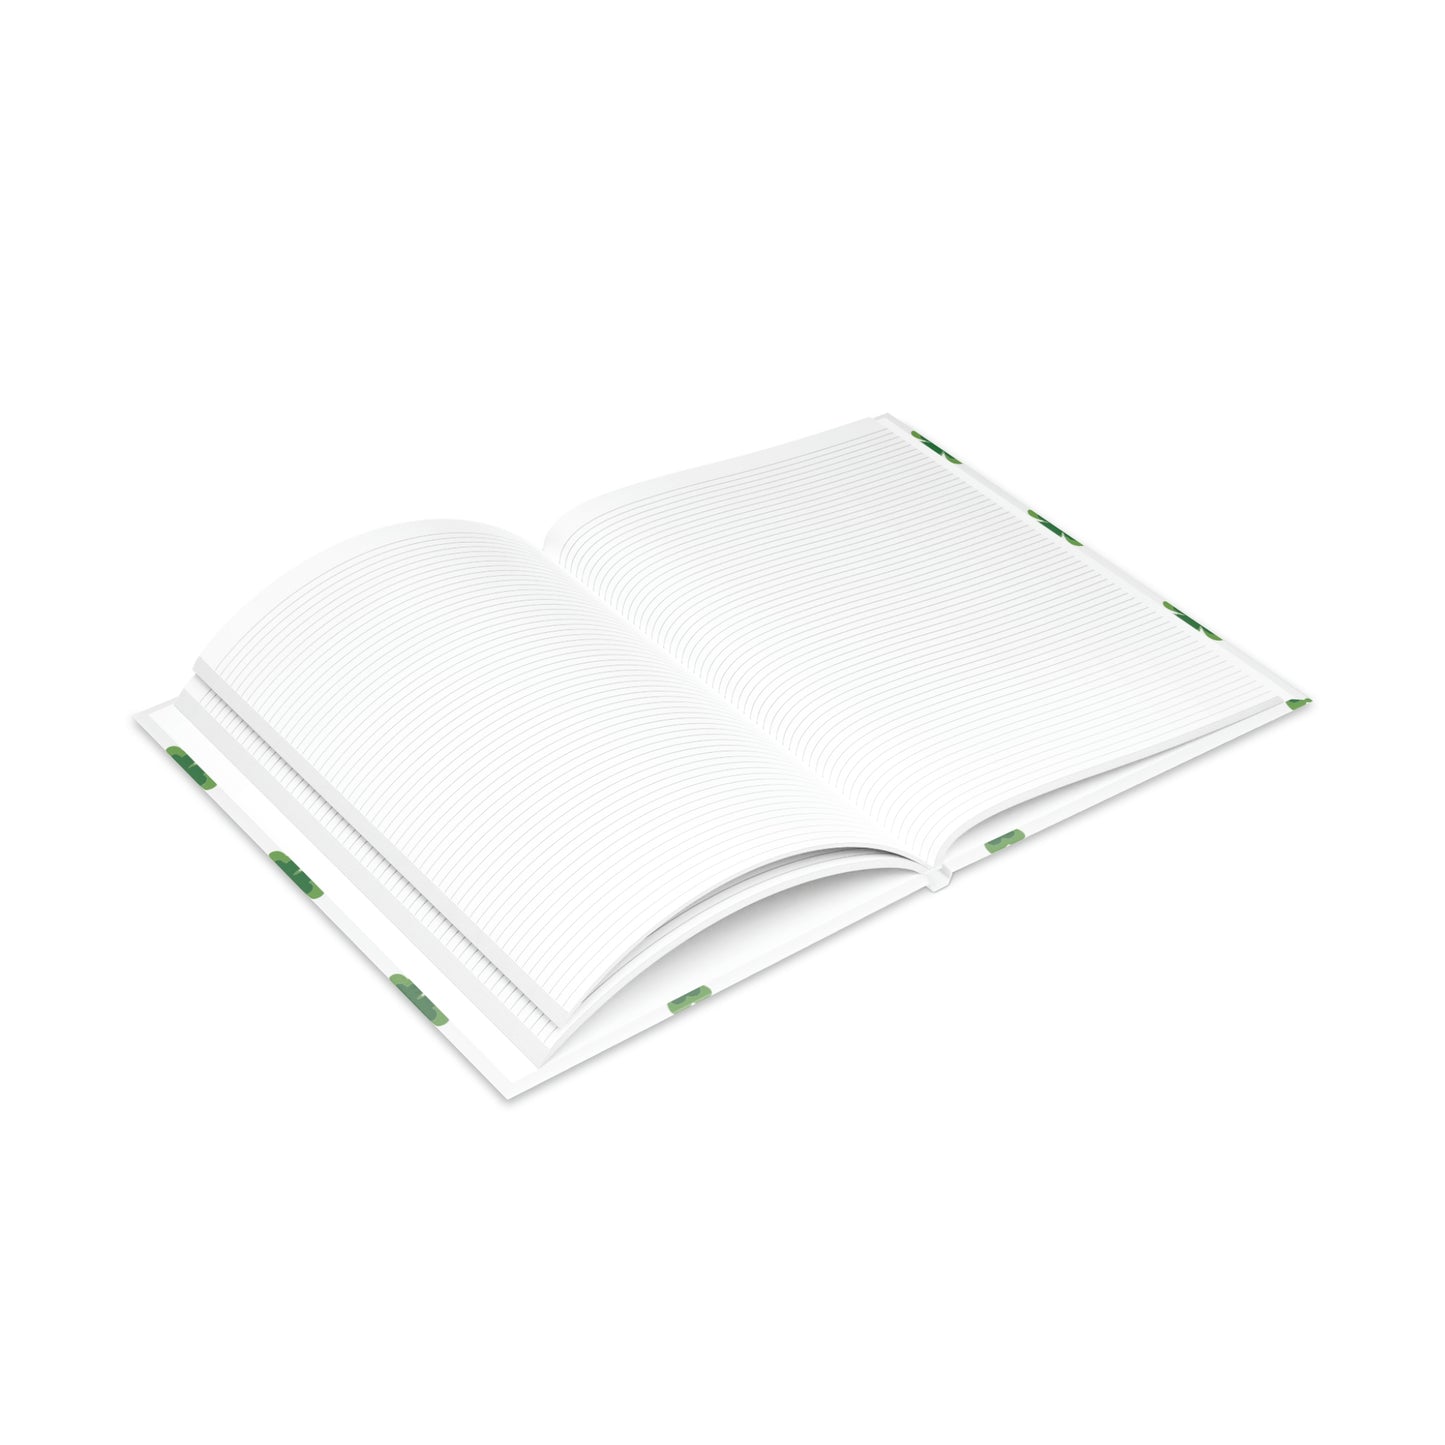 Tsalack Express Teens Hardcover Notebook with Puffy Covers